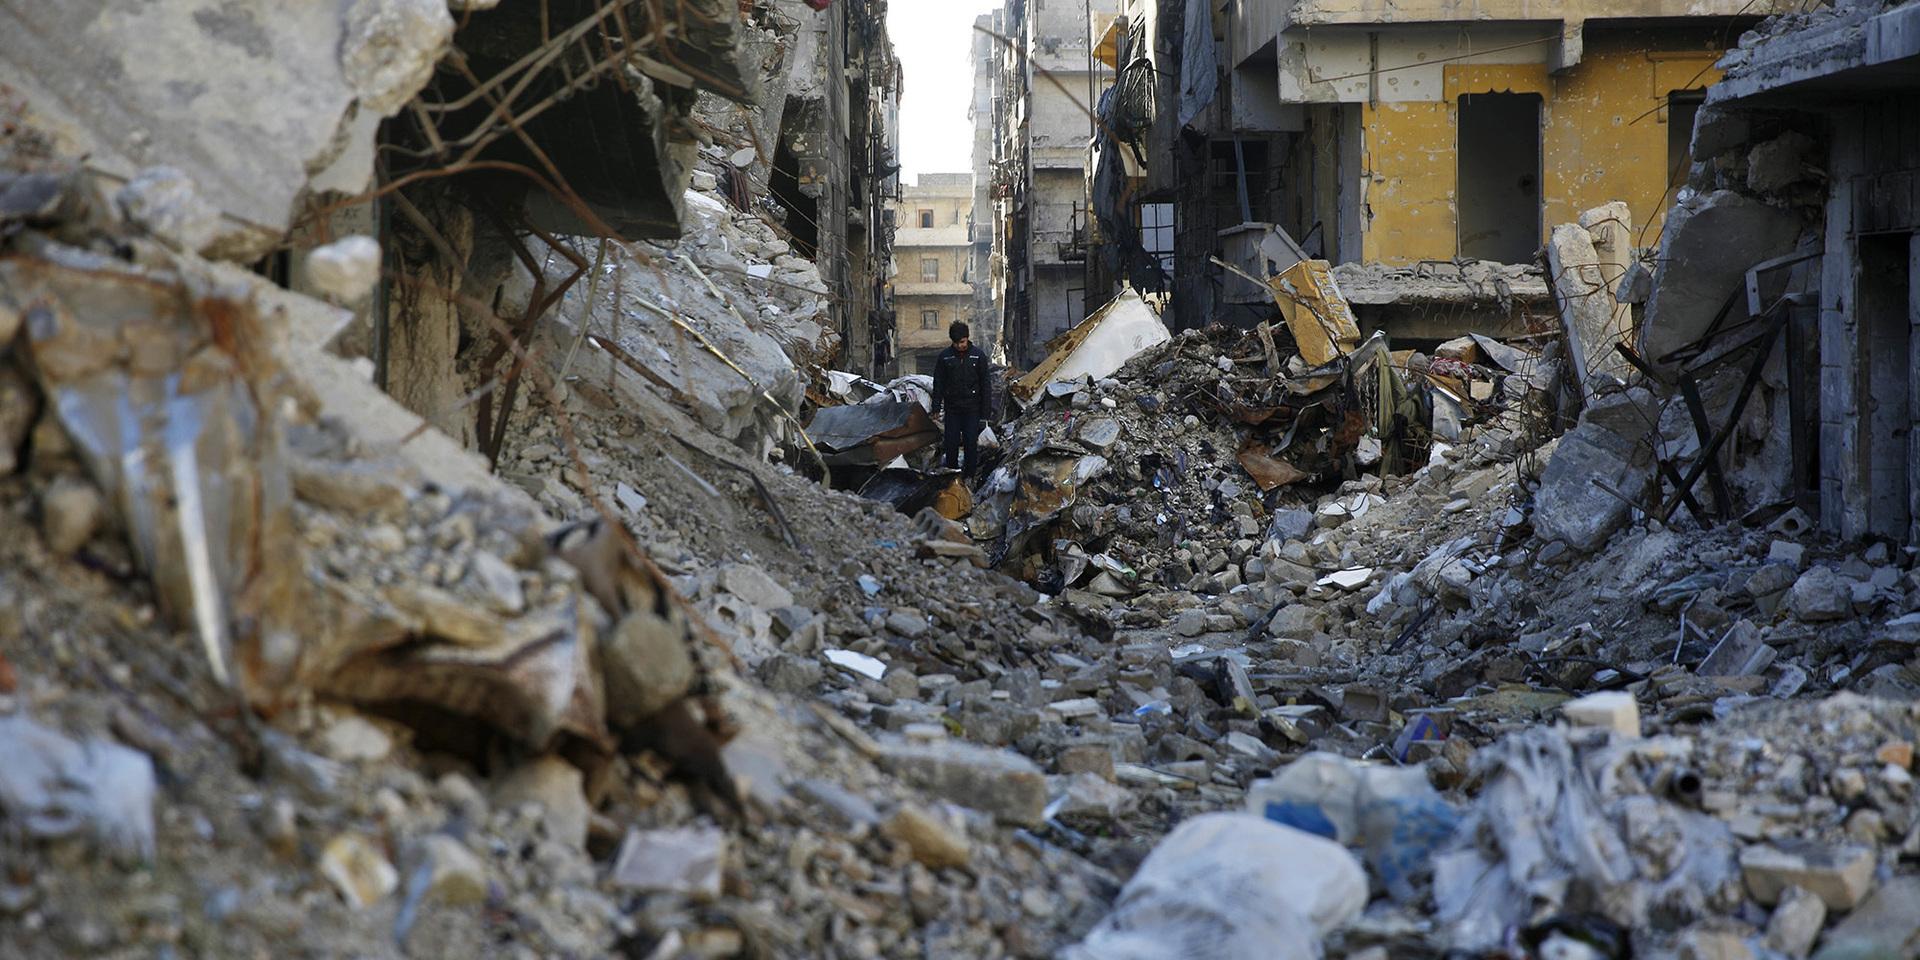 A Syrian walks through the destruction of the Salaheddine neighborhood in the eastern Aleppo, Syria, Saturday, Jan. 20, 2018. Turkey&apos;s military fired into a Kurdish-run enclave in north Syria for a second day on Saturday, one day after the country&apos;s defense minister announced an operation to &quot;cleanse&quot; the Kurdish militia in control of the enclave. (AP Photo/Hassan Ammar)